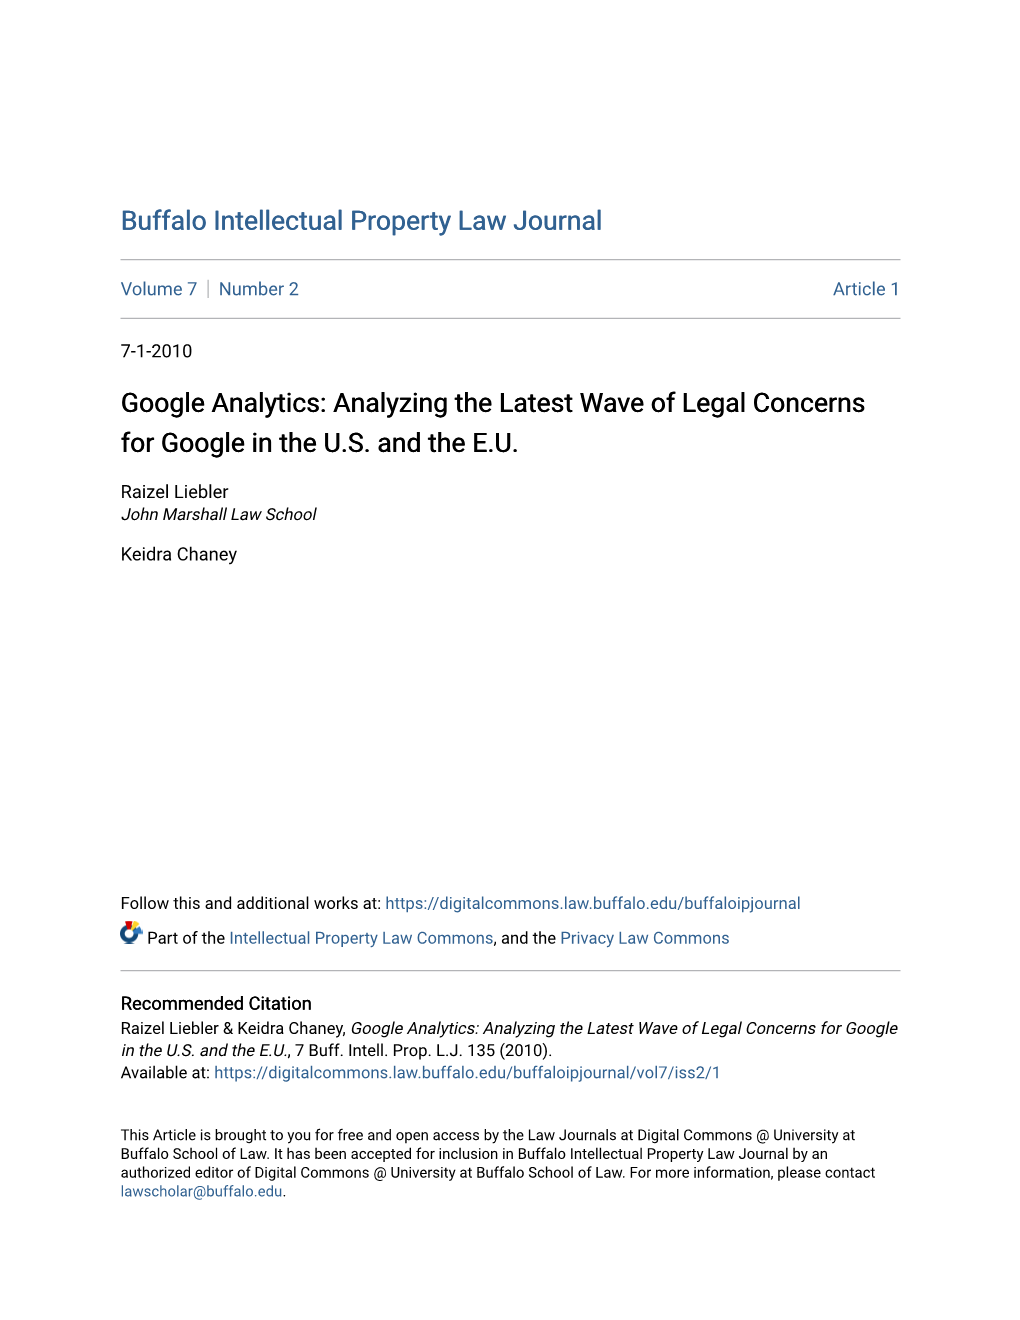 Google Analytics: Analyzing the Latest Wave of Legal Concerns for Google in the U.S